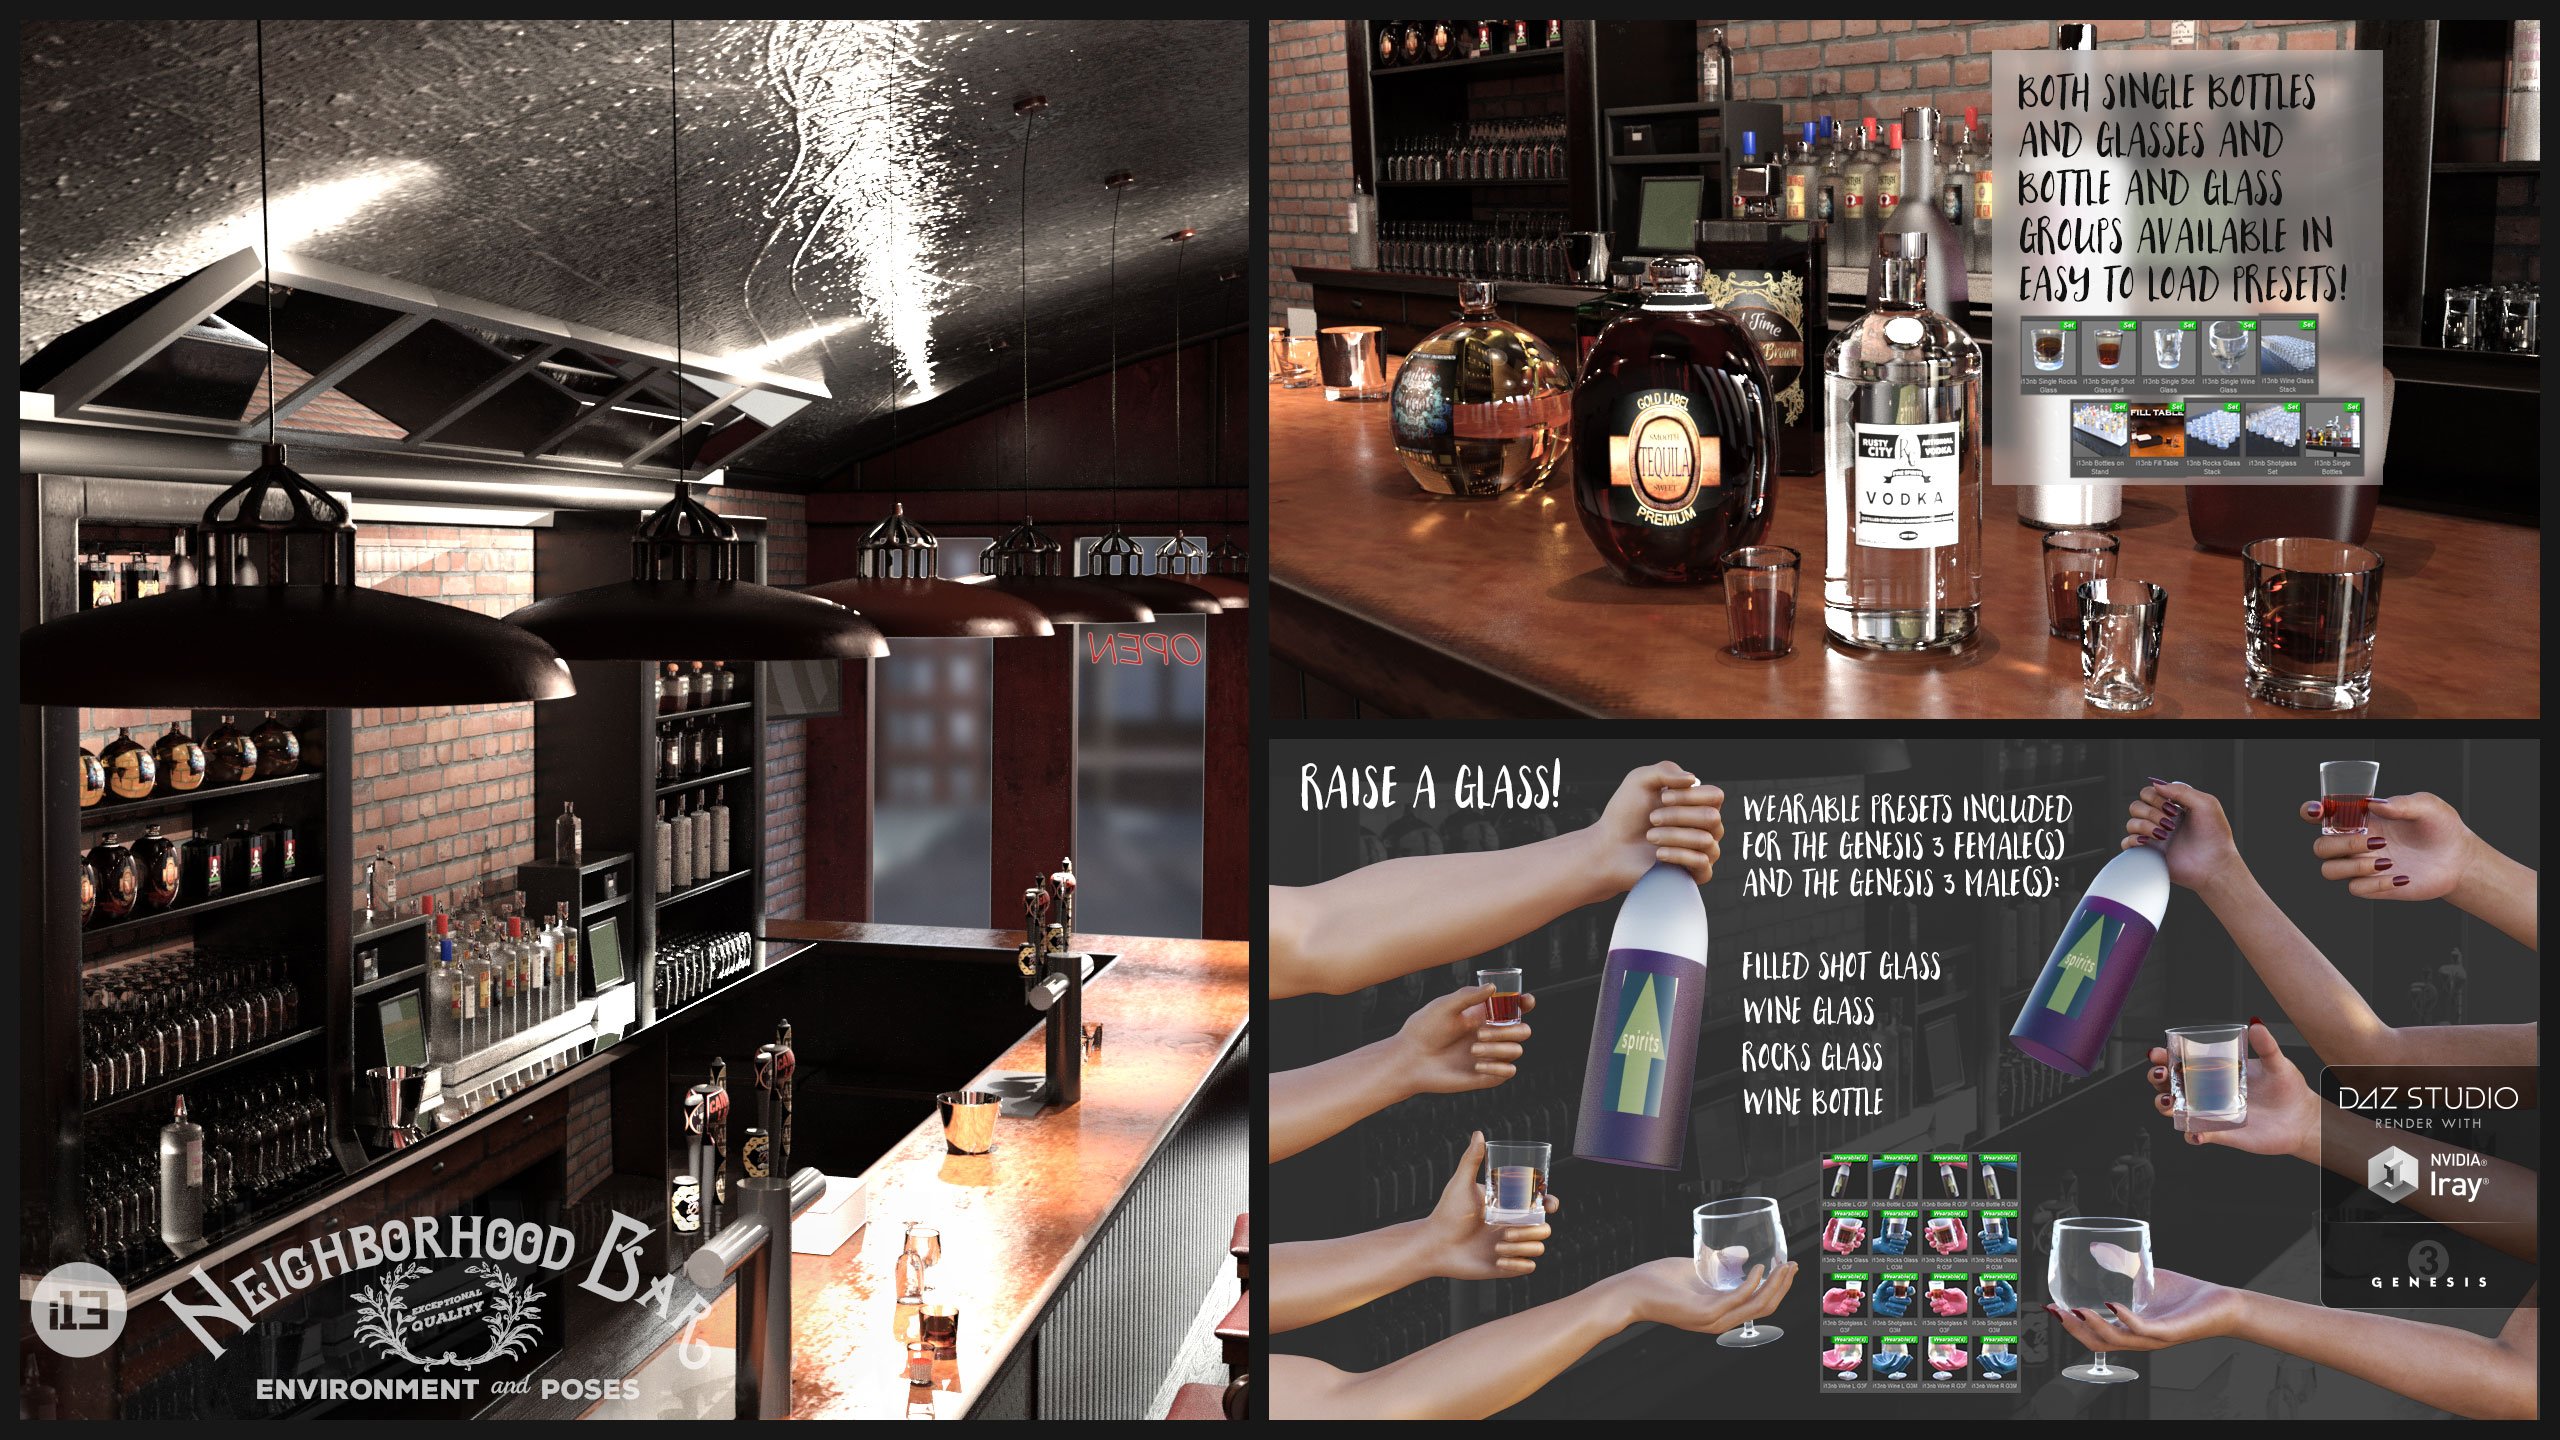 i13 Neighborhood Bar Environment with Poses by: ironman13, 3D Models by Daz 3D